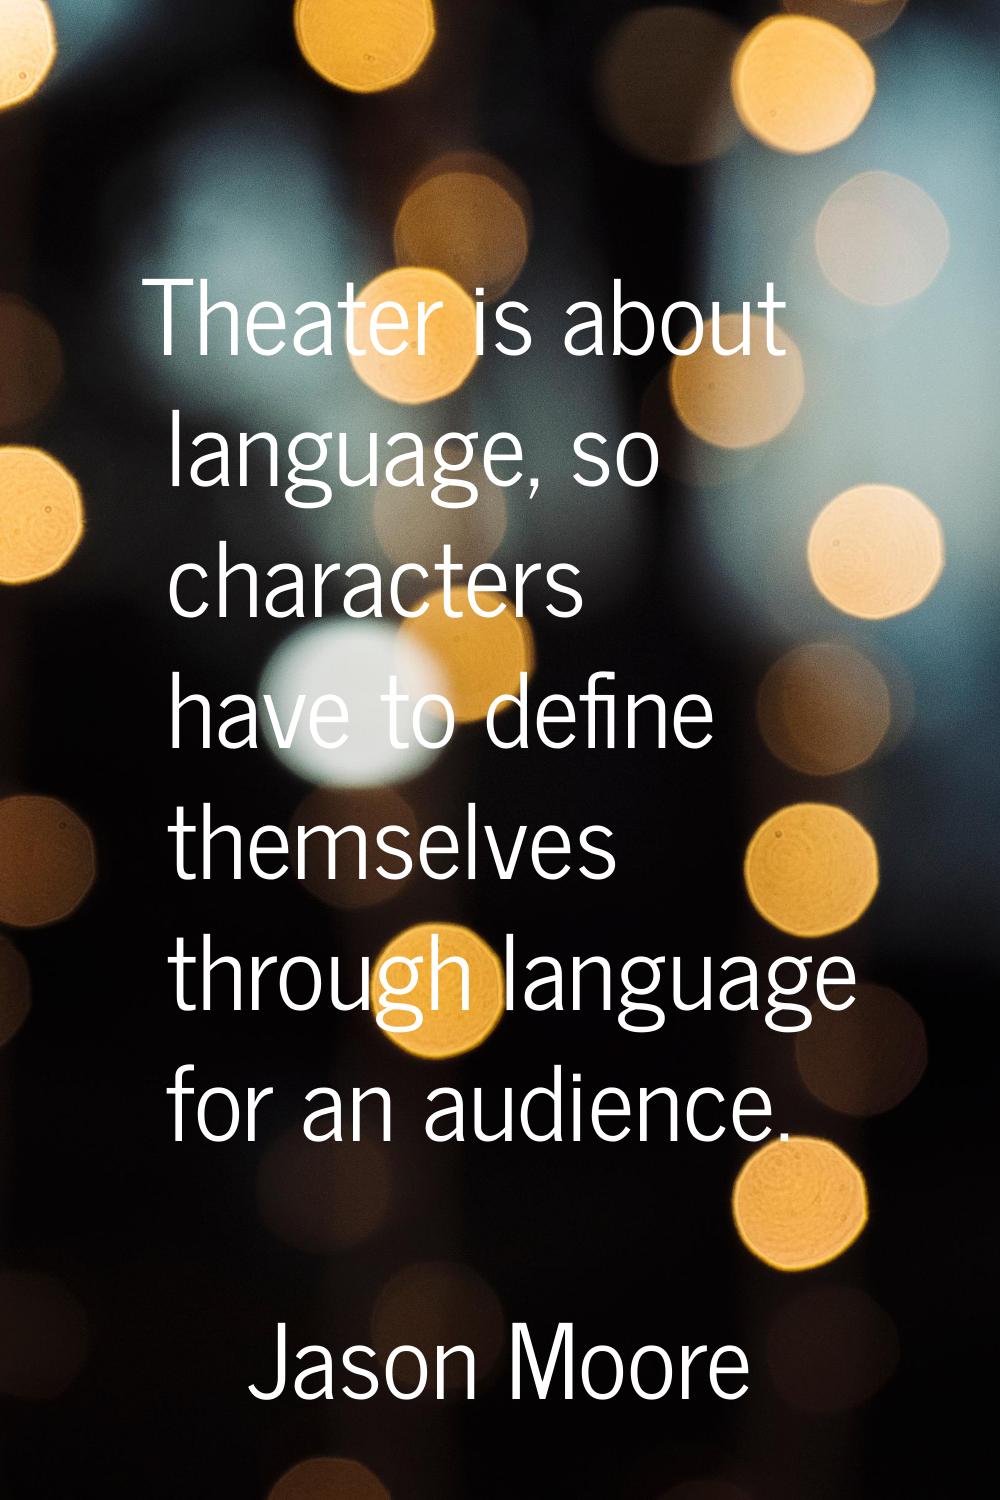 Theater is about language, so characters have to define themselves through language for an audience